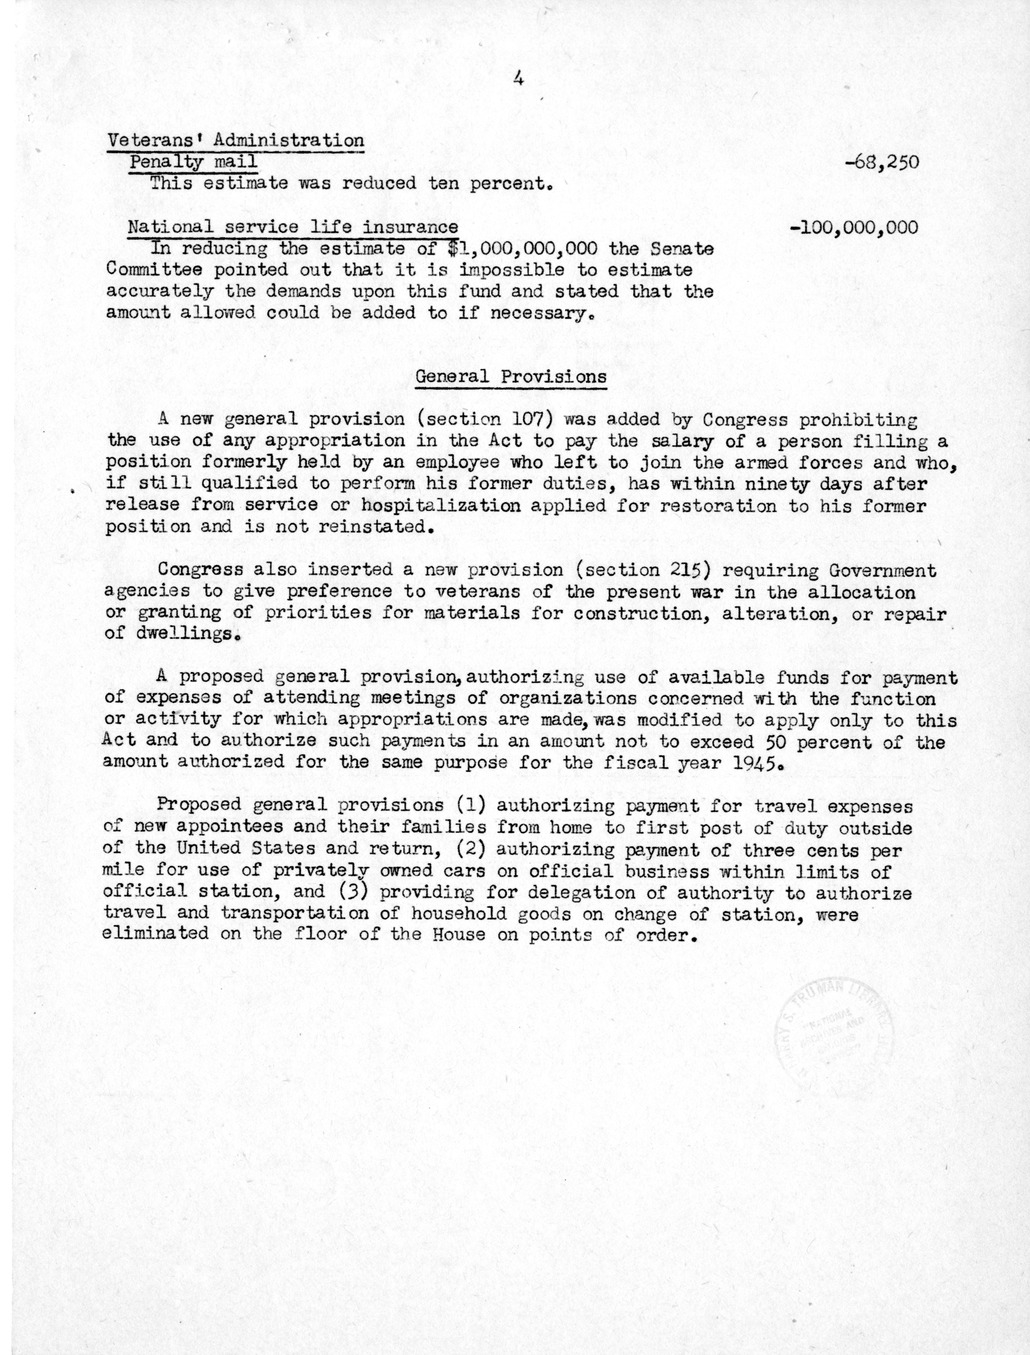 Memorandum from Harold D. Smith to M. C. Latta, H. R. 1984, Appropriations for the Executive Office and Independence Executive Agencies, with Attachments